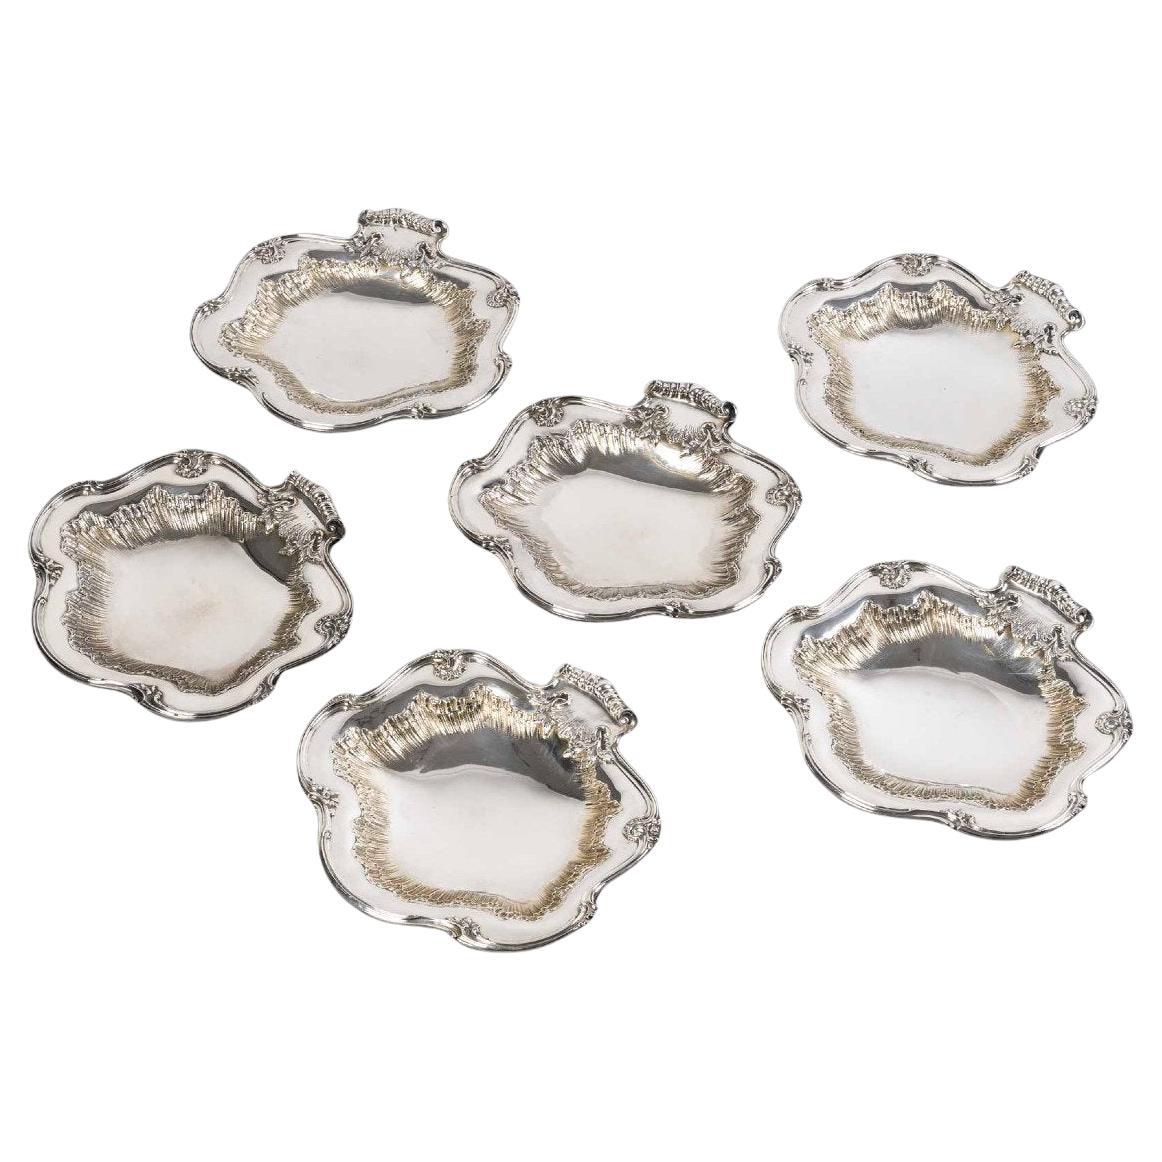 Boin Taburet - Suite Of Six Shell Dishes Sterling Silver 19th For Sale